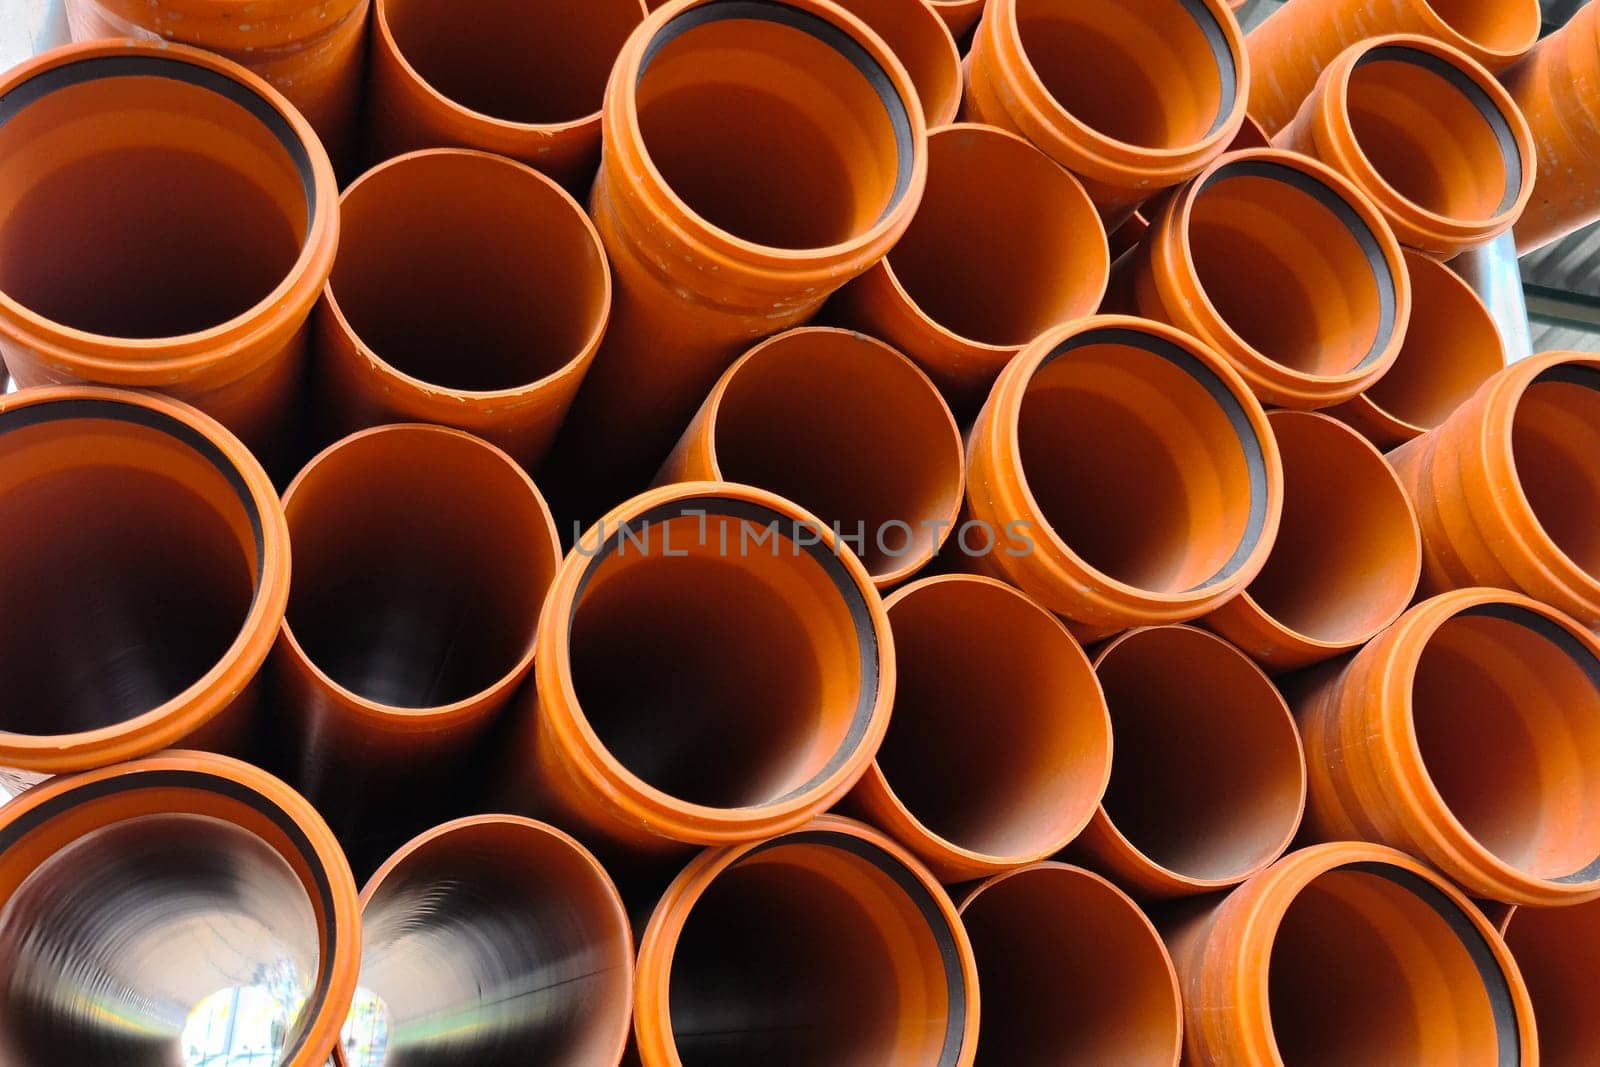 Lots of new orange sewer pipes.